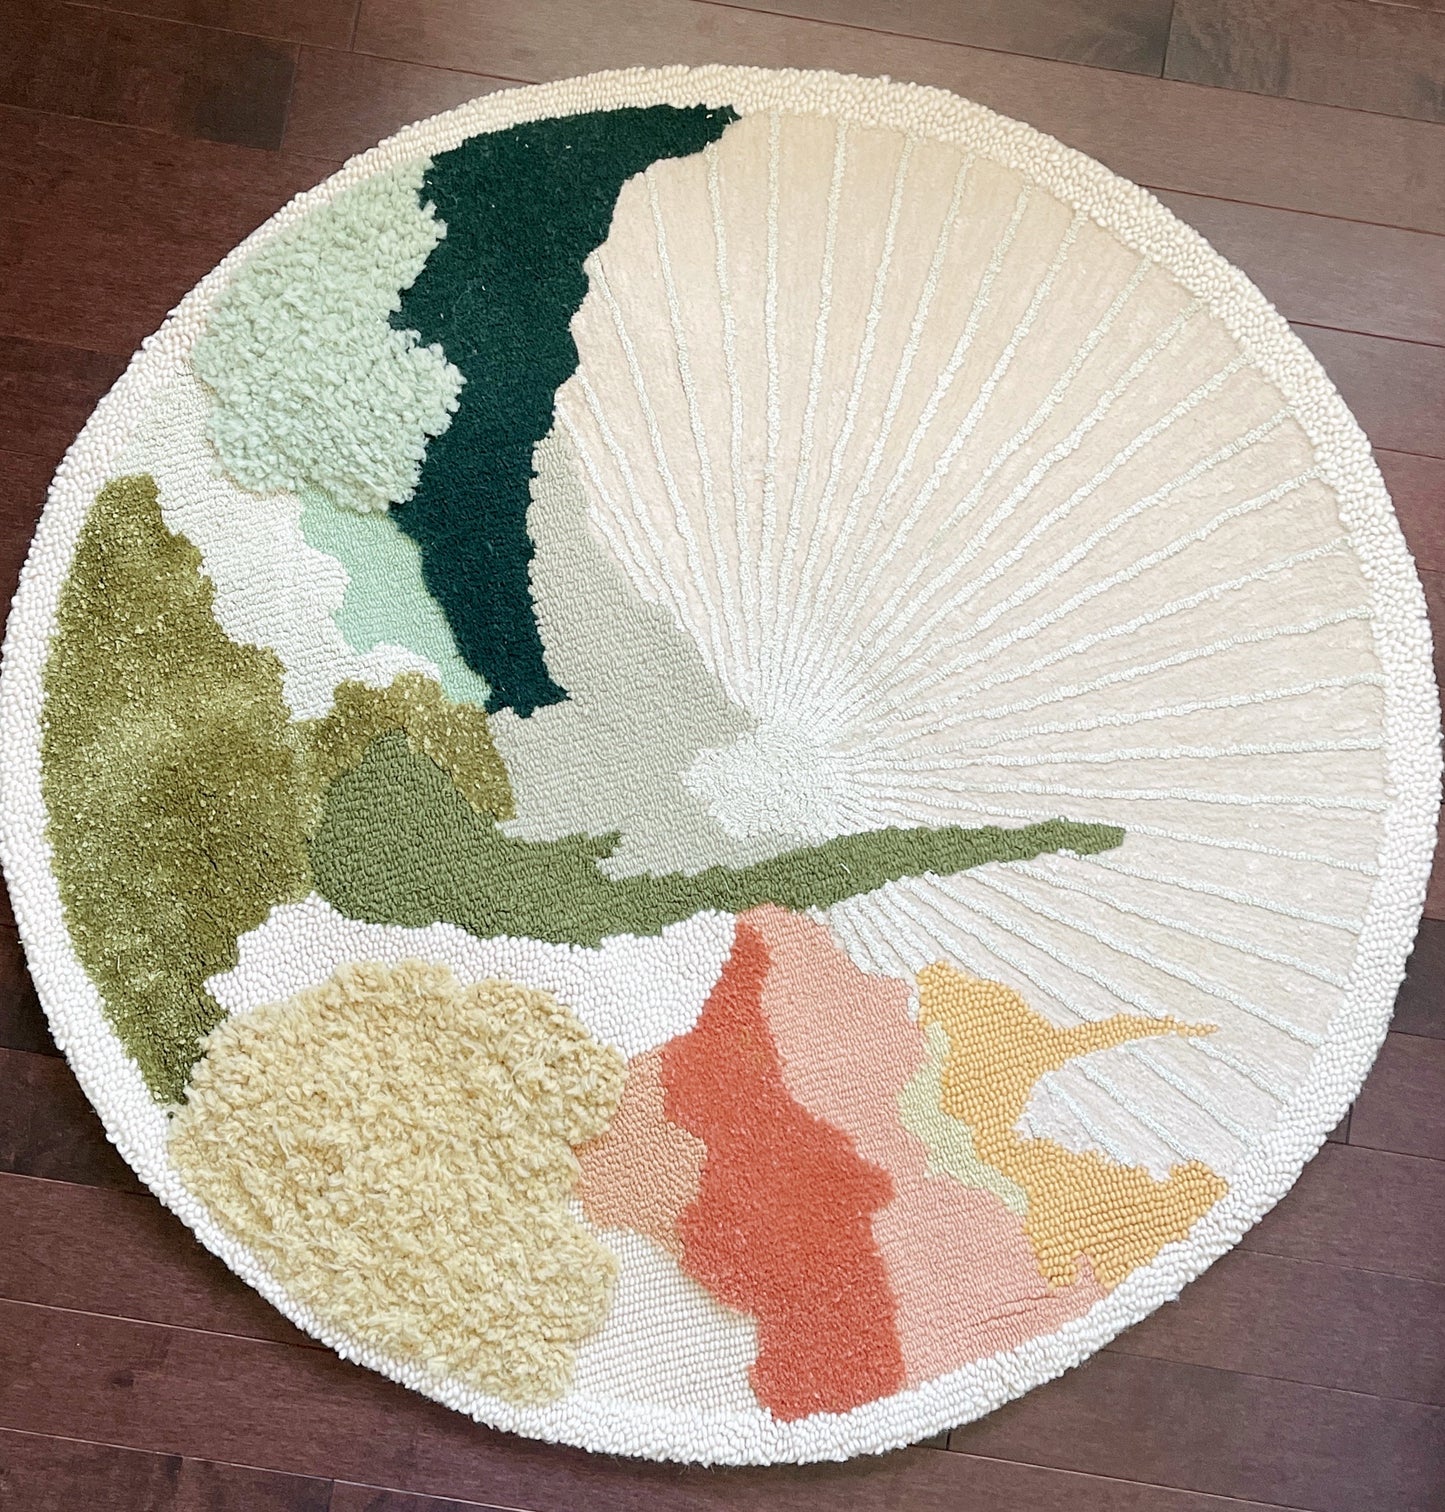 Hand Hooked Round Wool Rug, Abstract Lush Area Rug, Nursery Rug, Abstract Landscape Modern Home Décor